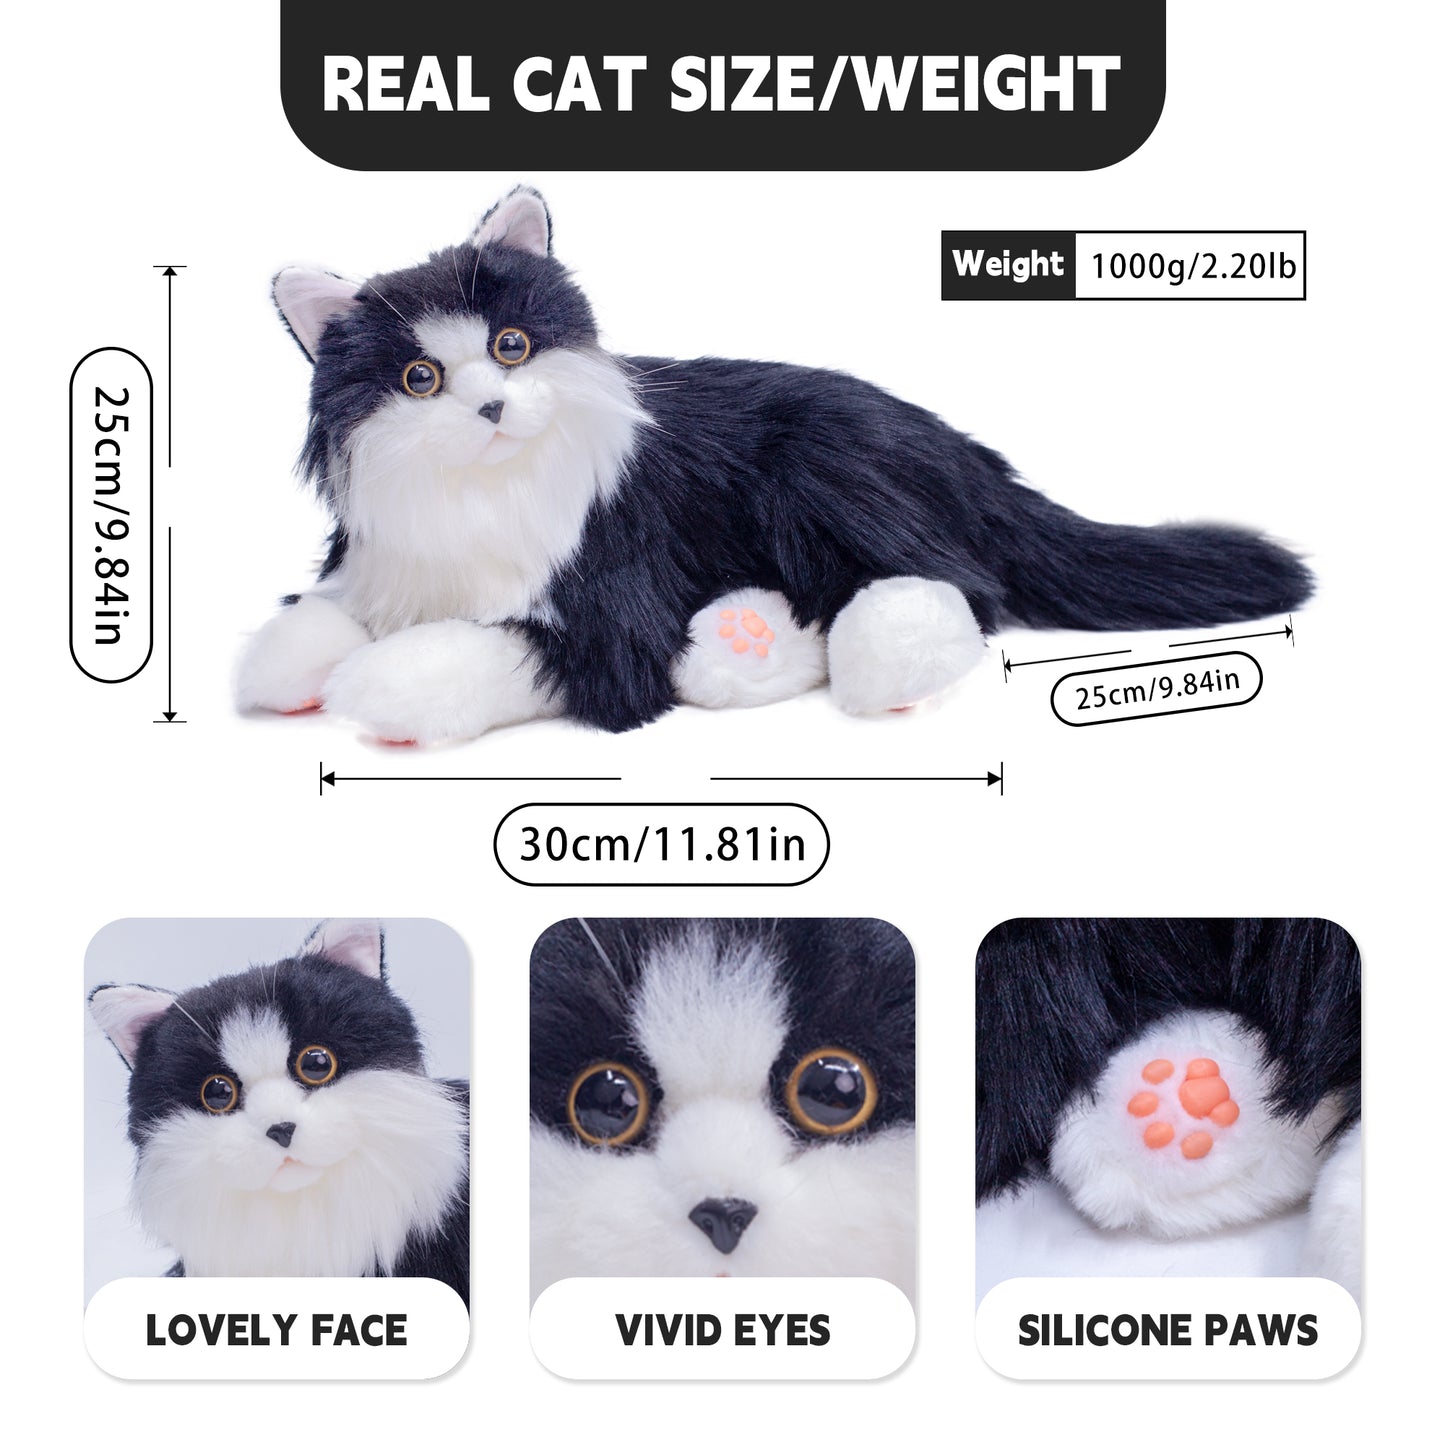 Chongker Interactive Companion Robot Pets Realistic Stuffed Animals Cat Plush Voice Heartbeat and Purring,Gifts for Parents